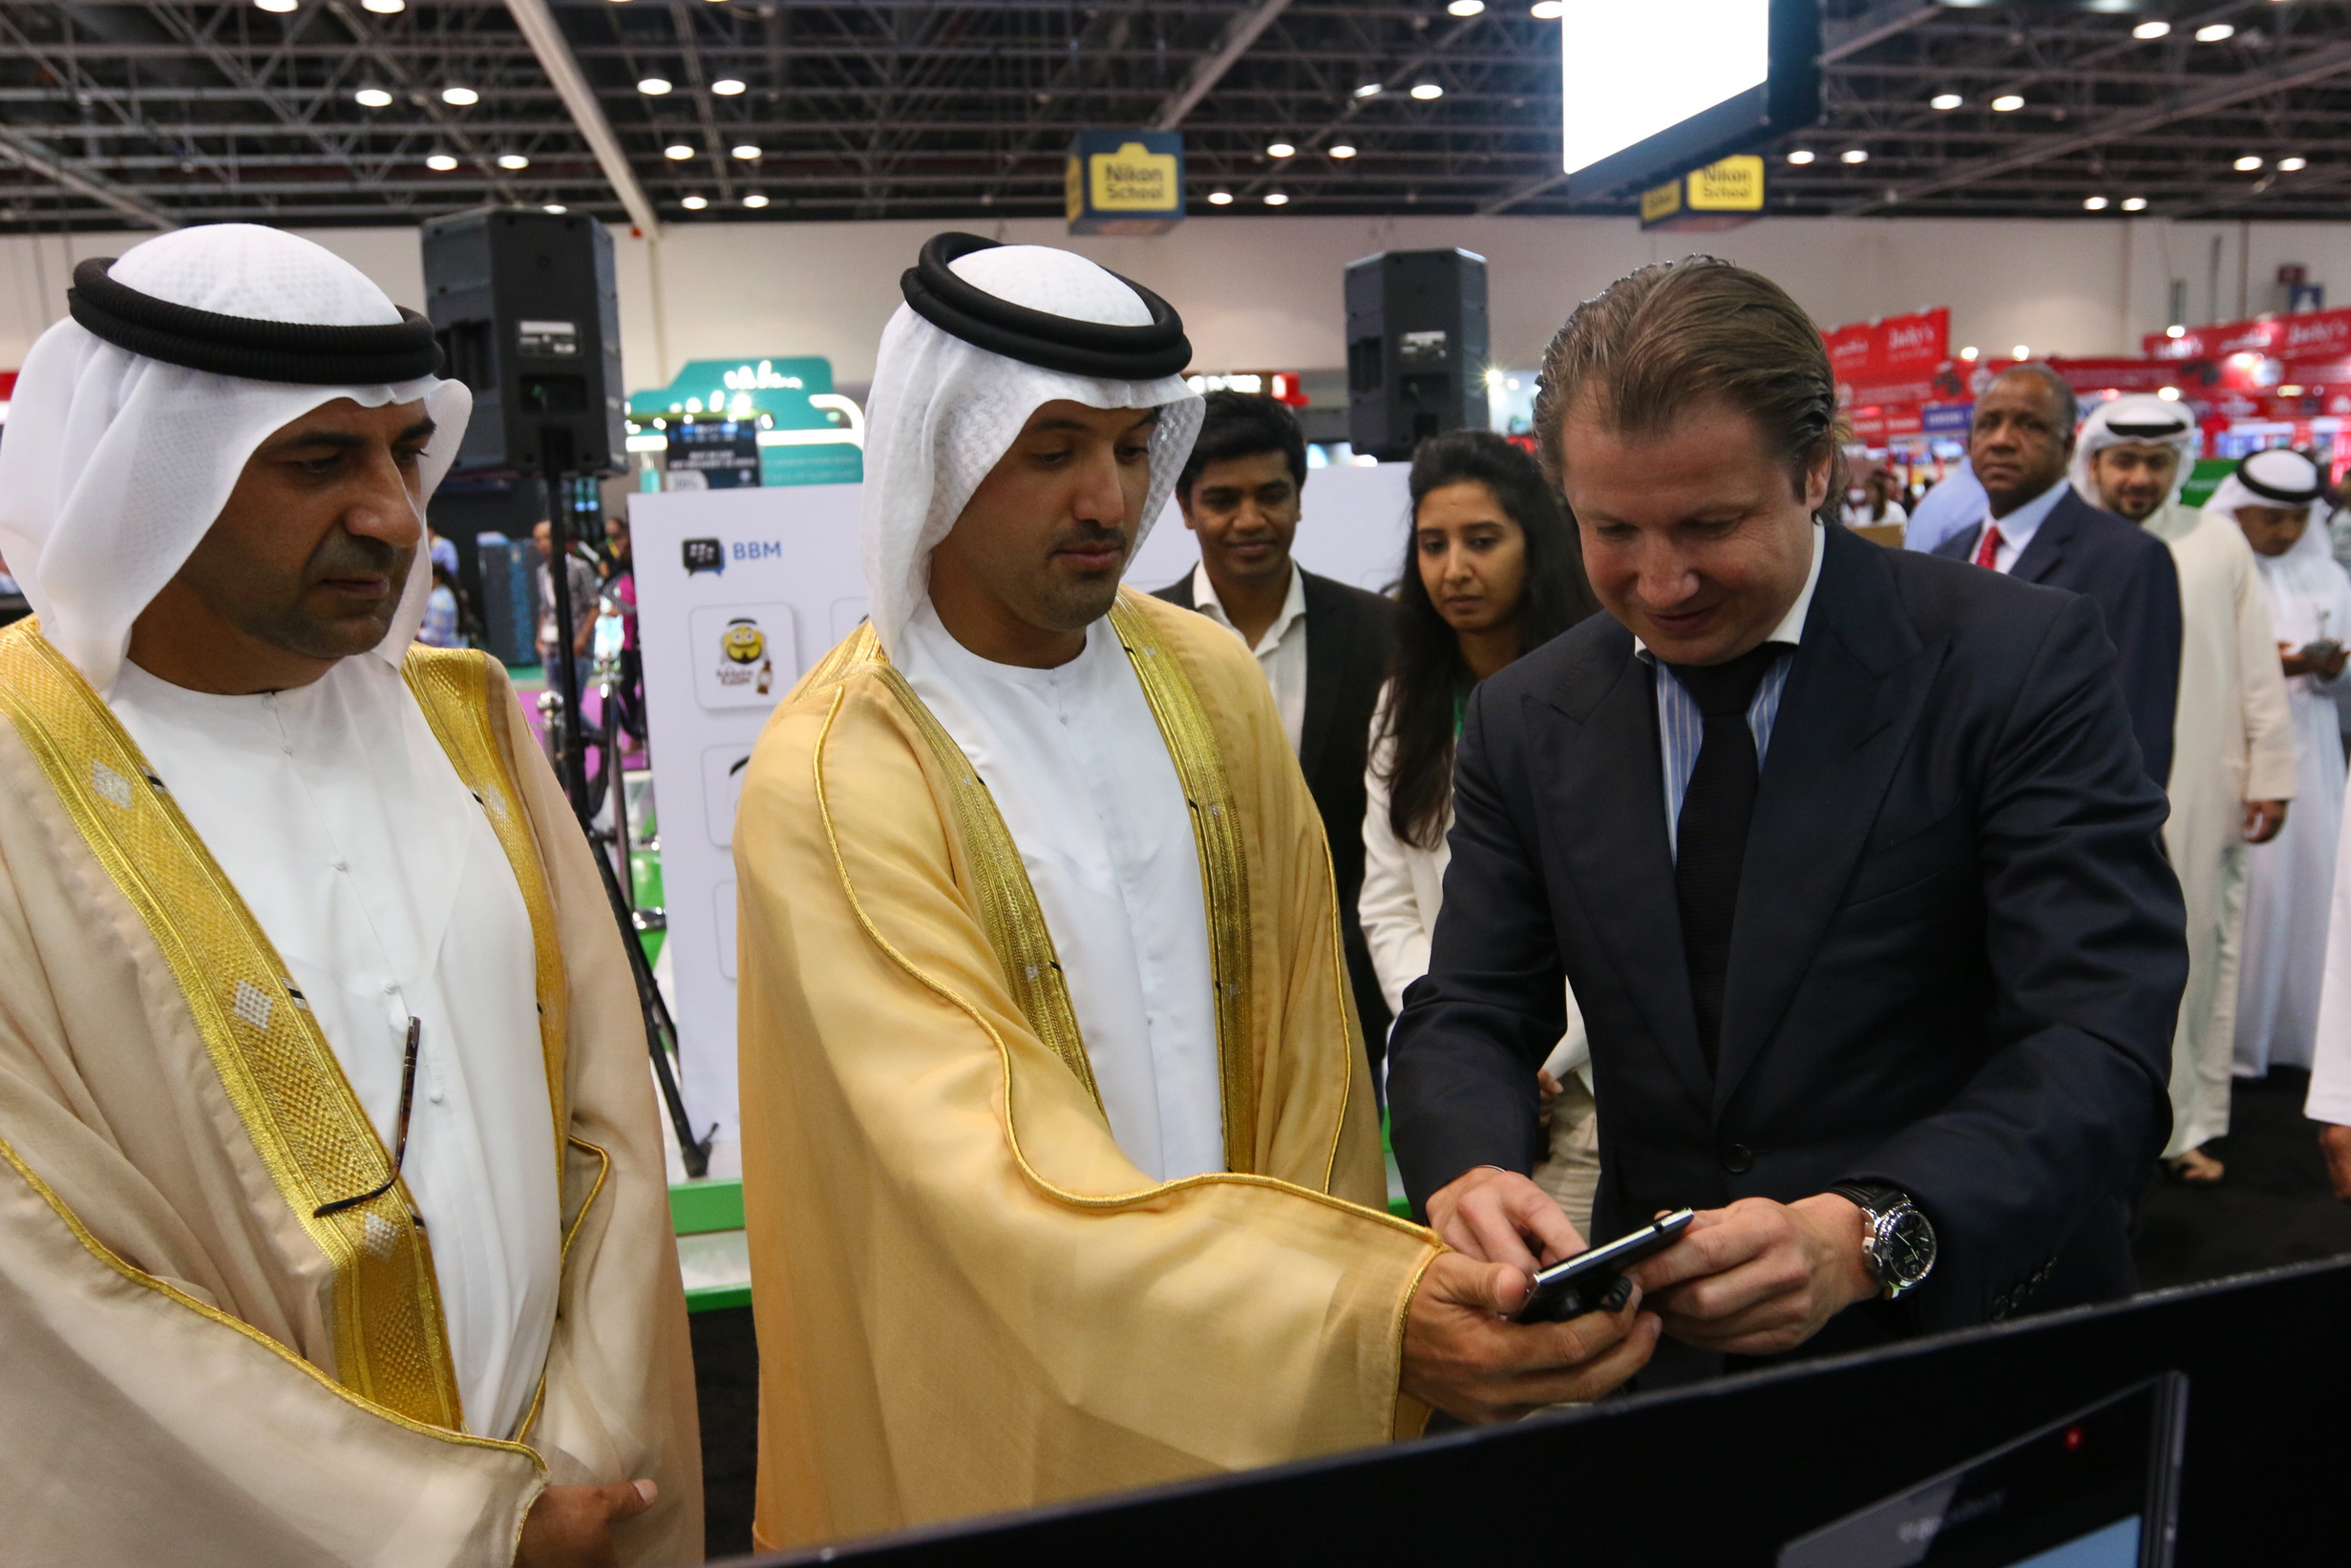 Director General of Dubai's Department of Tourism and Commerce Marketing (DTCM), Helal Saeed Al Marri during the opening day of Gitex Shopper 2014 in Dubai World Trade Centre